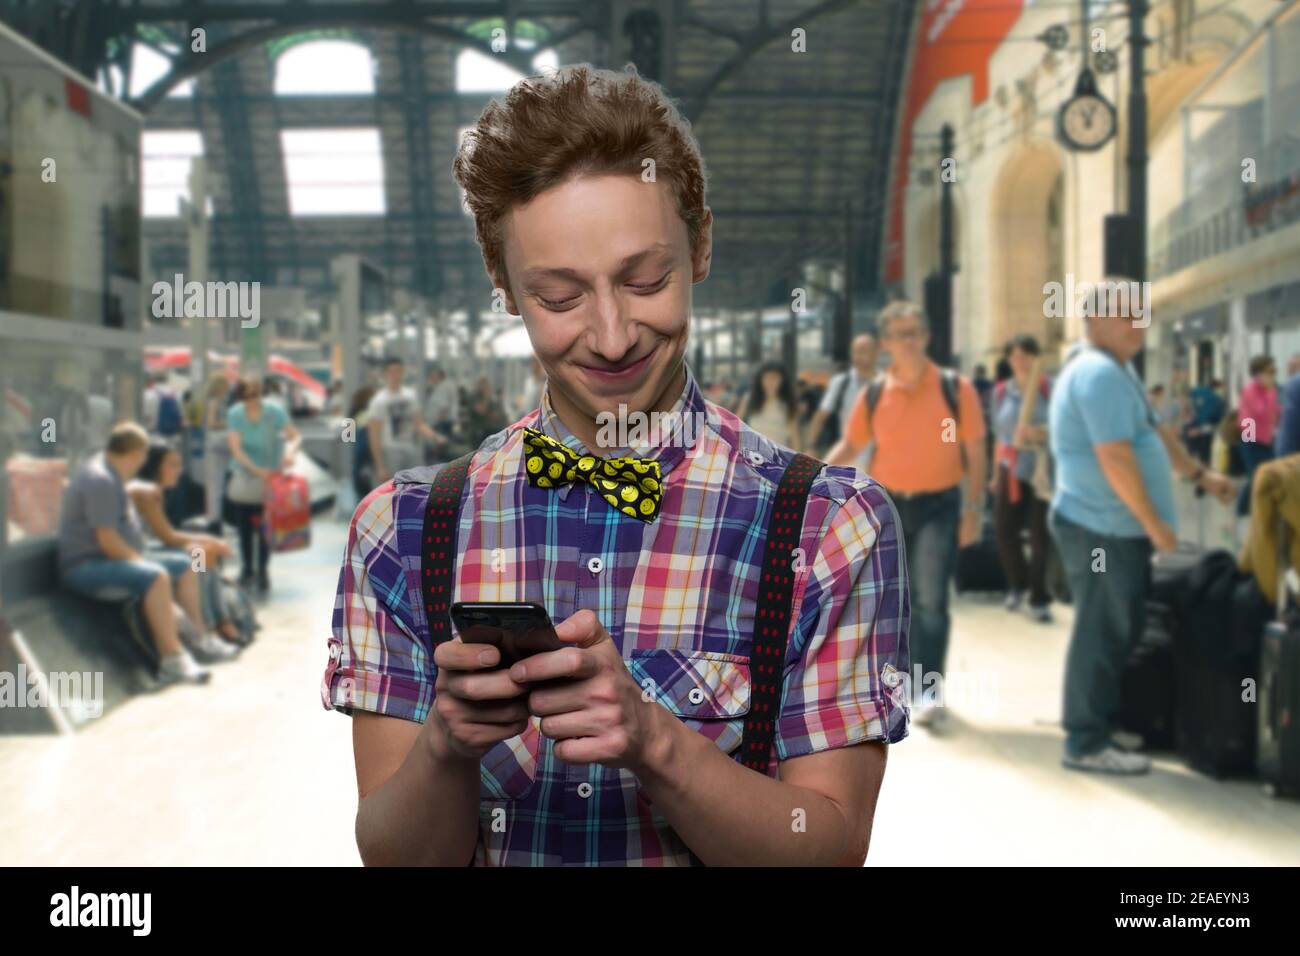 Smiling teenager is texting a message on his smartphone. Stock Photo